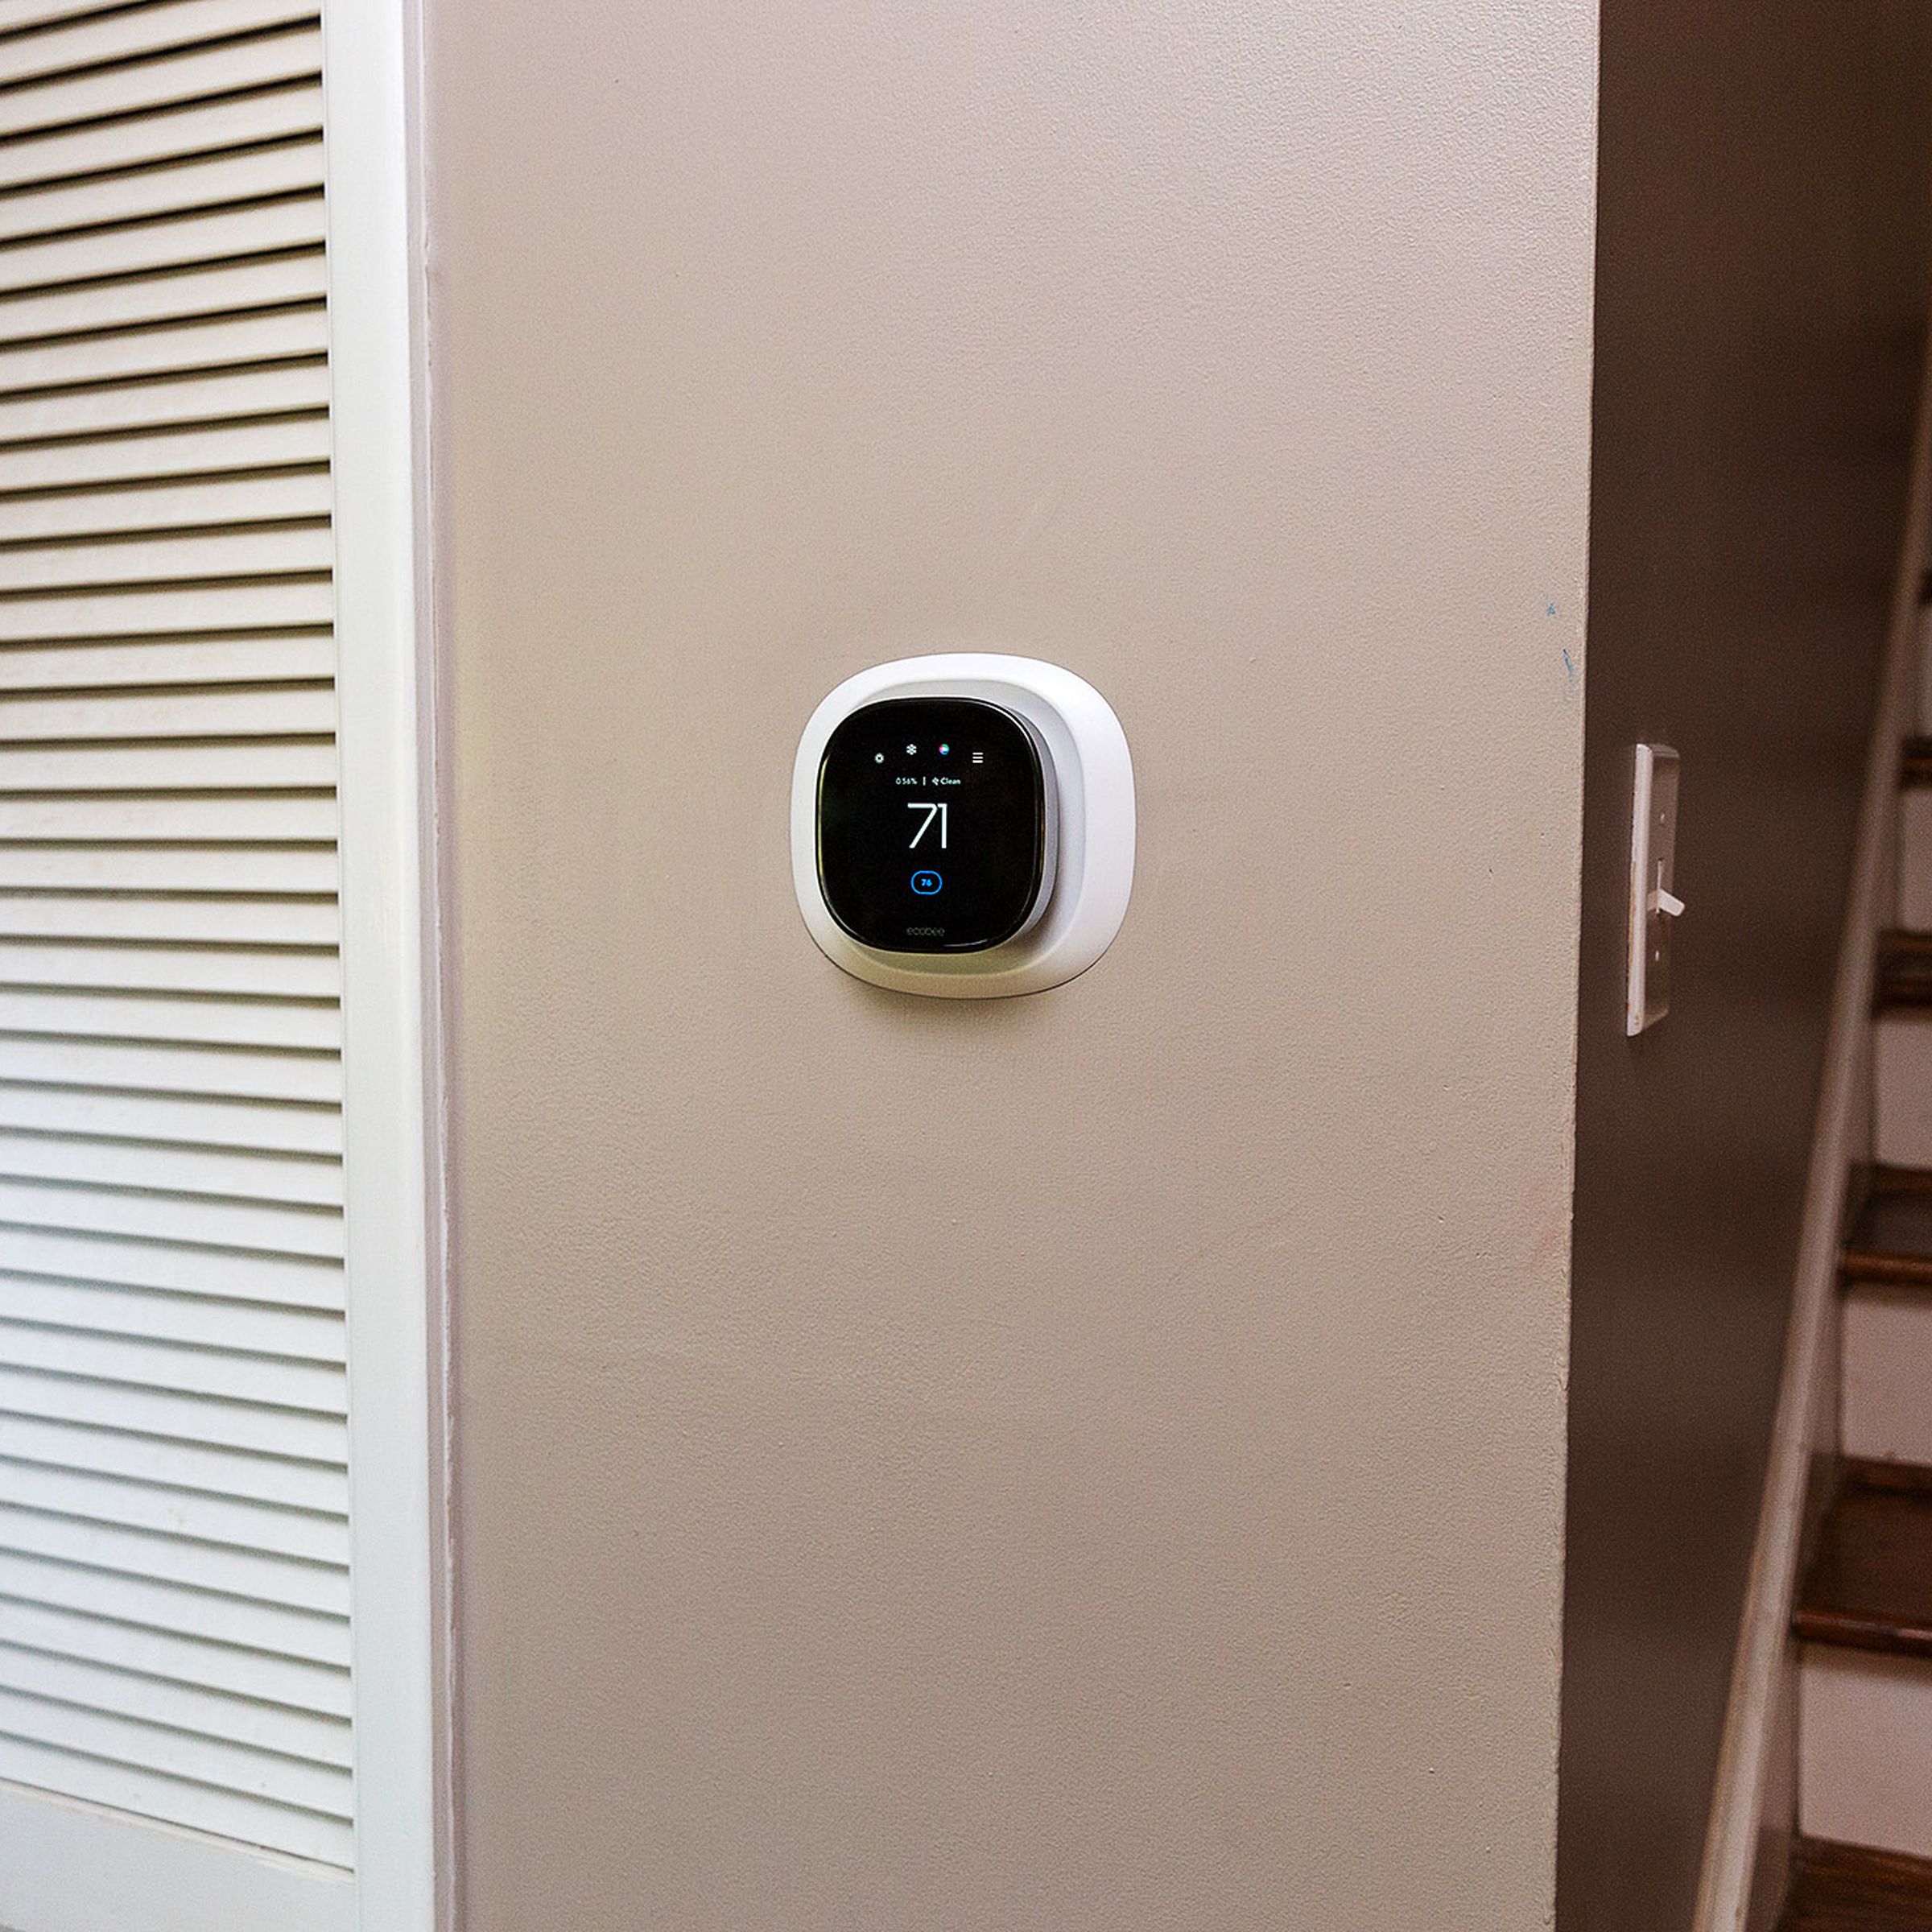 Small Ecobee thermostat on a tan wall in between closet and staircase.